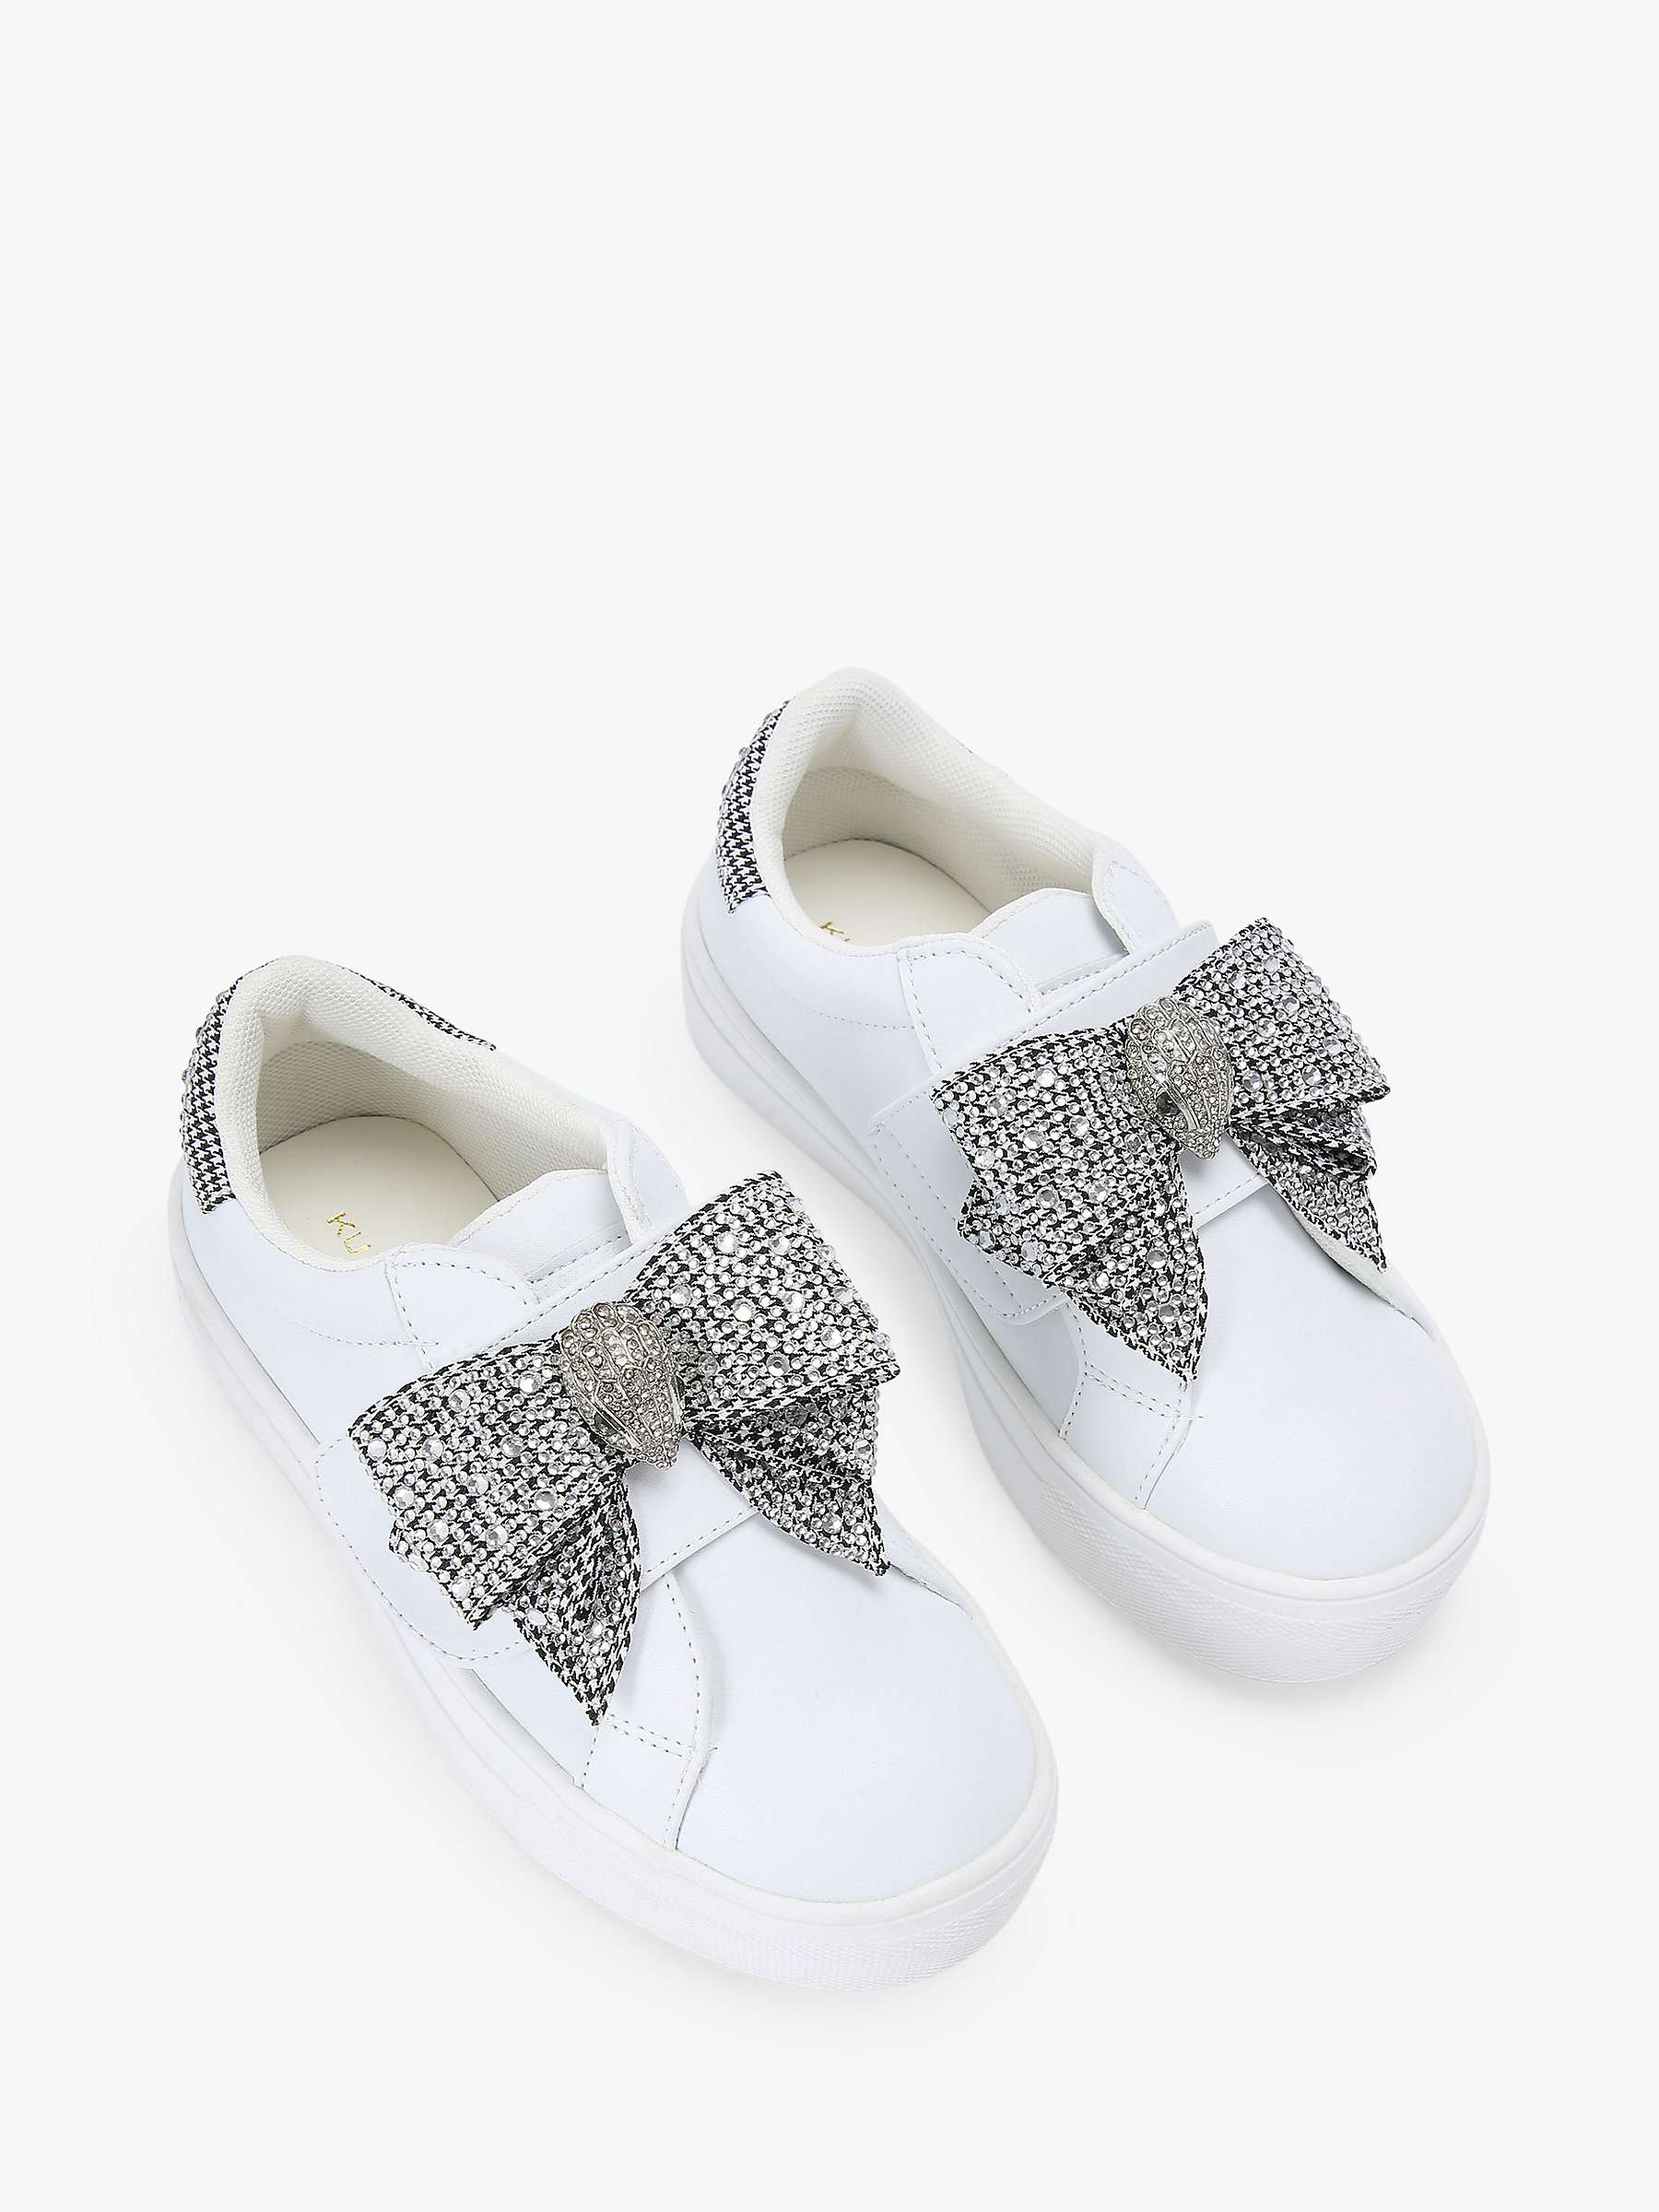 Buy Kurt Geiger London Kids' Mini Laney Bow Leather Trainers, White/Silver Online at johnlewis.com